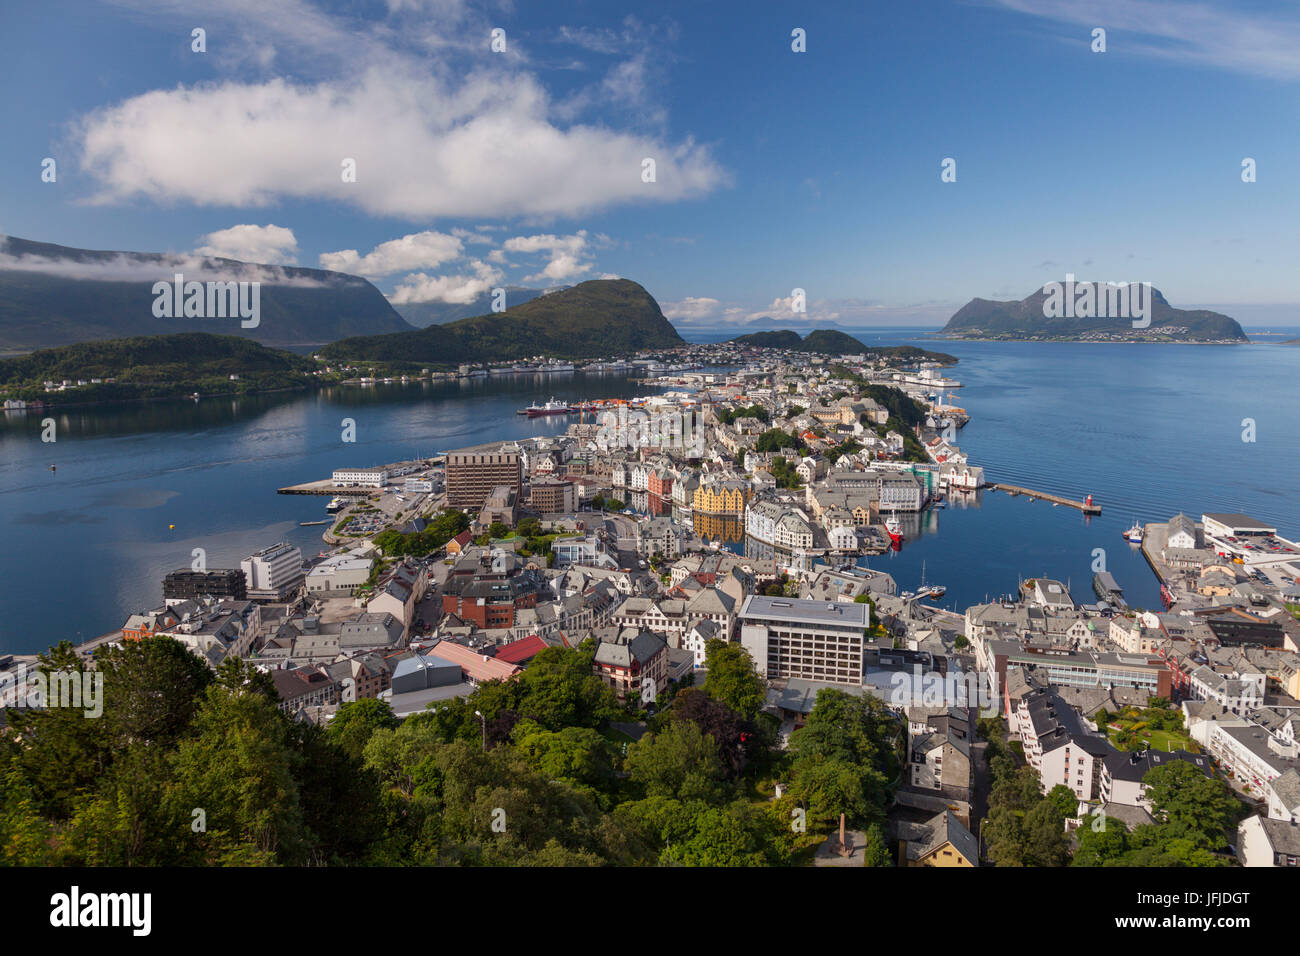 Alesund, Vestlandet, Norway, View from above of Alesund, one of most important port of Norway, Stock Photo